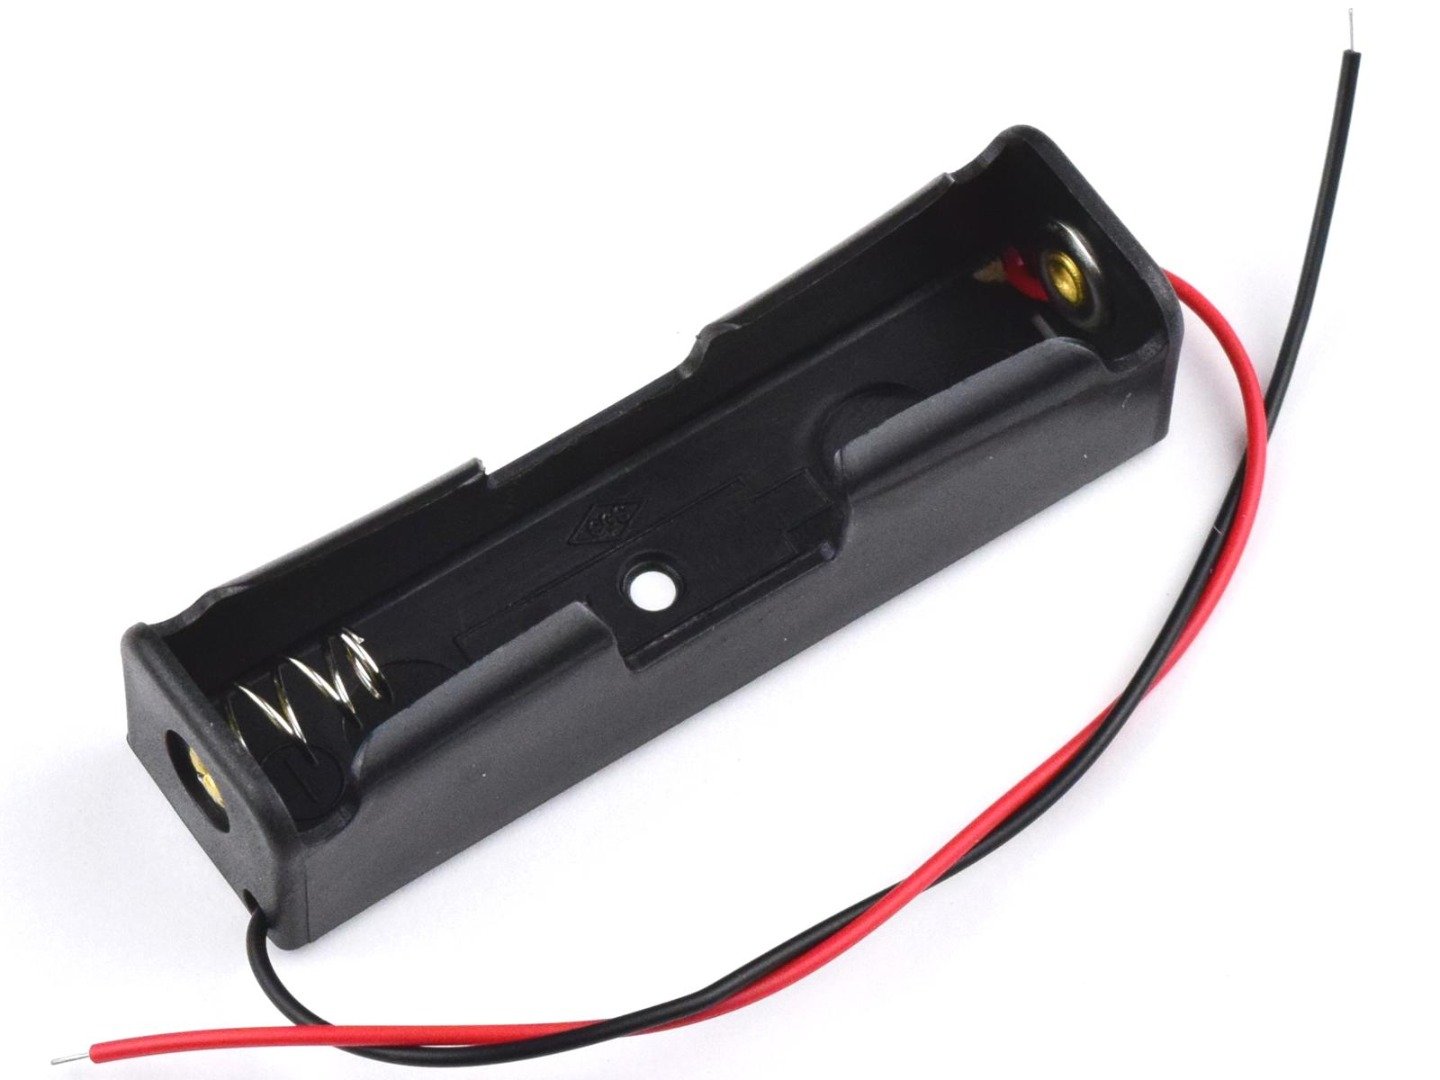 Lithium Battery Holder for 18650 Cell with Open Wire Ends 4